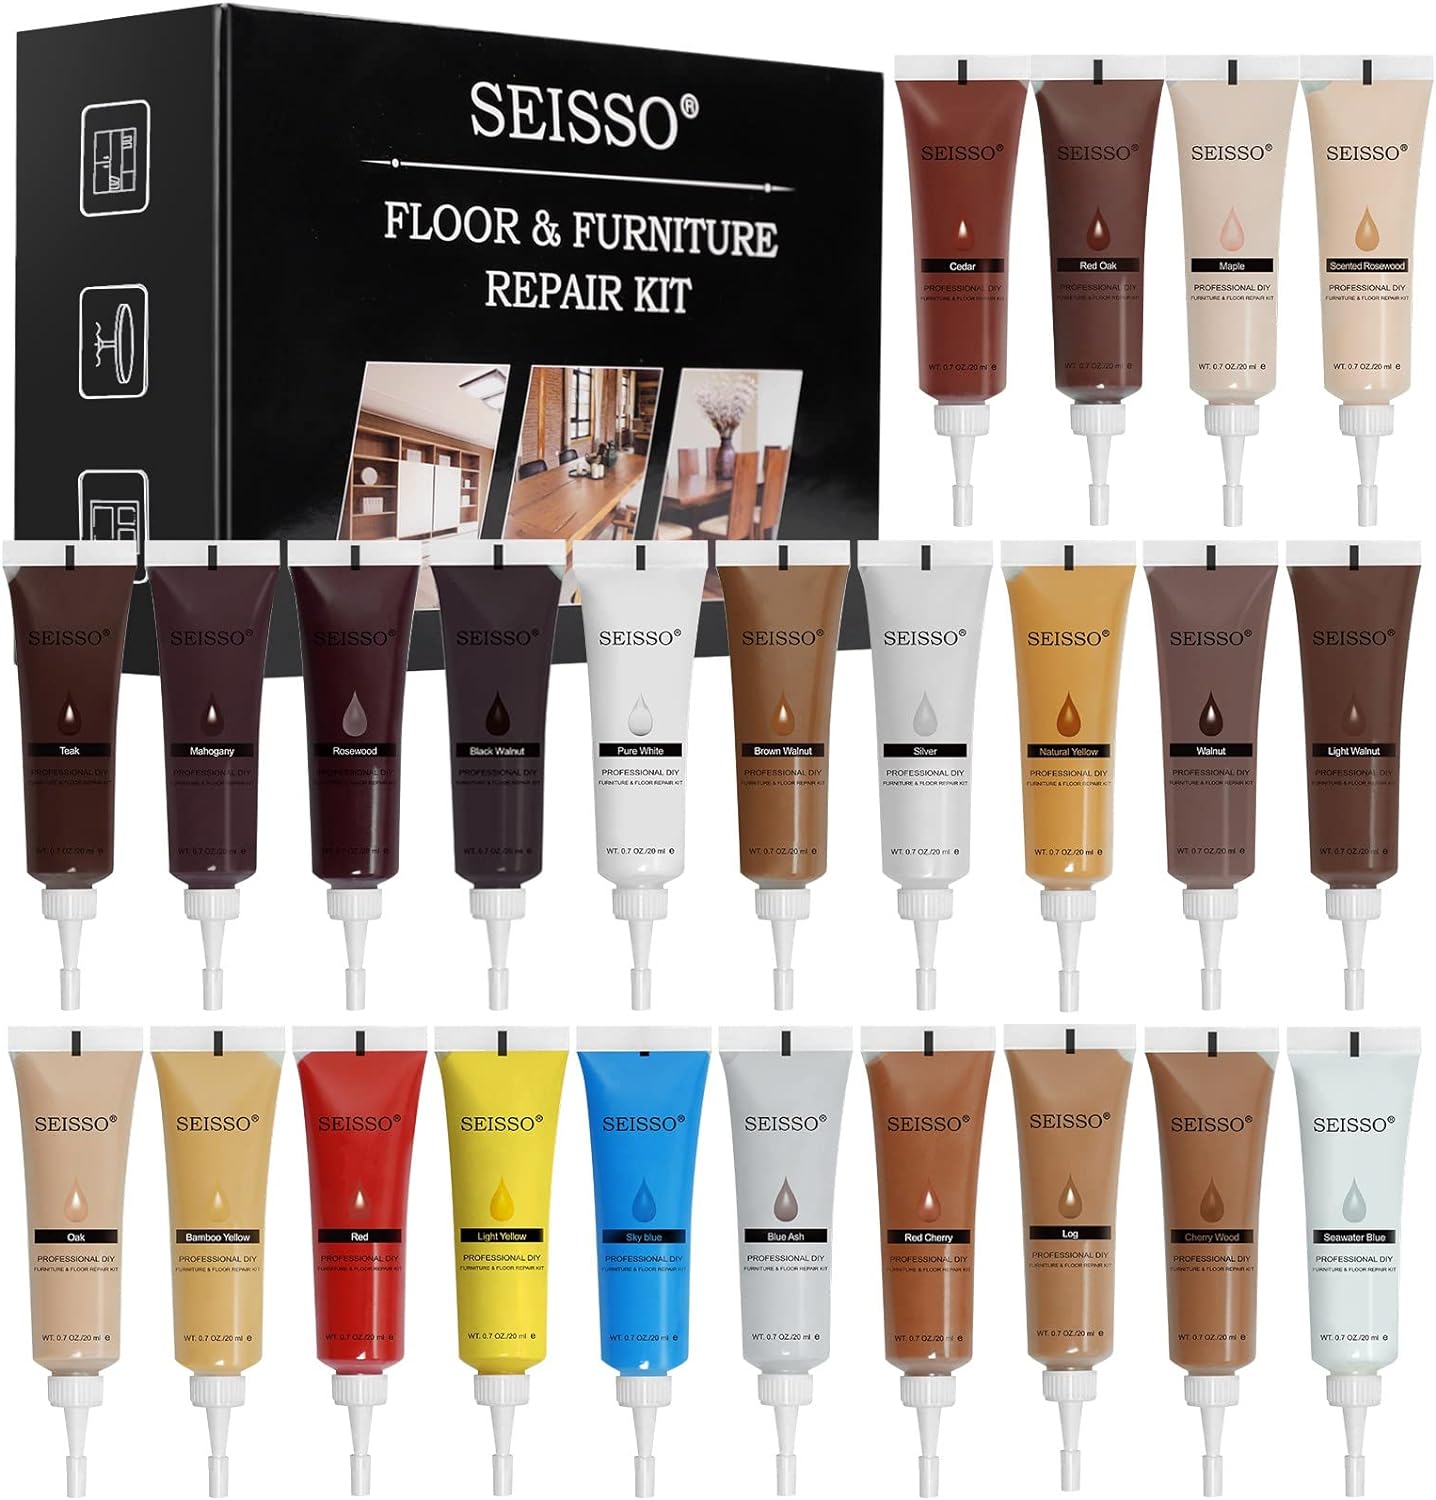 SEISSO Furniture Repair Kit, Wood Floor Repair Kit Furniture Touch Up Kit Cover Wood Scratch Restorer Filler for Wooden Floor, Table, Door, Cabinet, with 24 Brushes, 2 Scrapers (24 Colors (set of 50?)